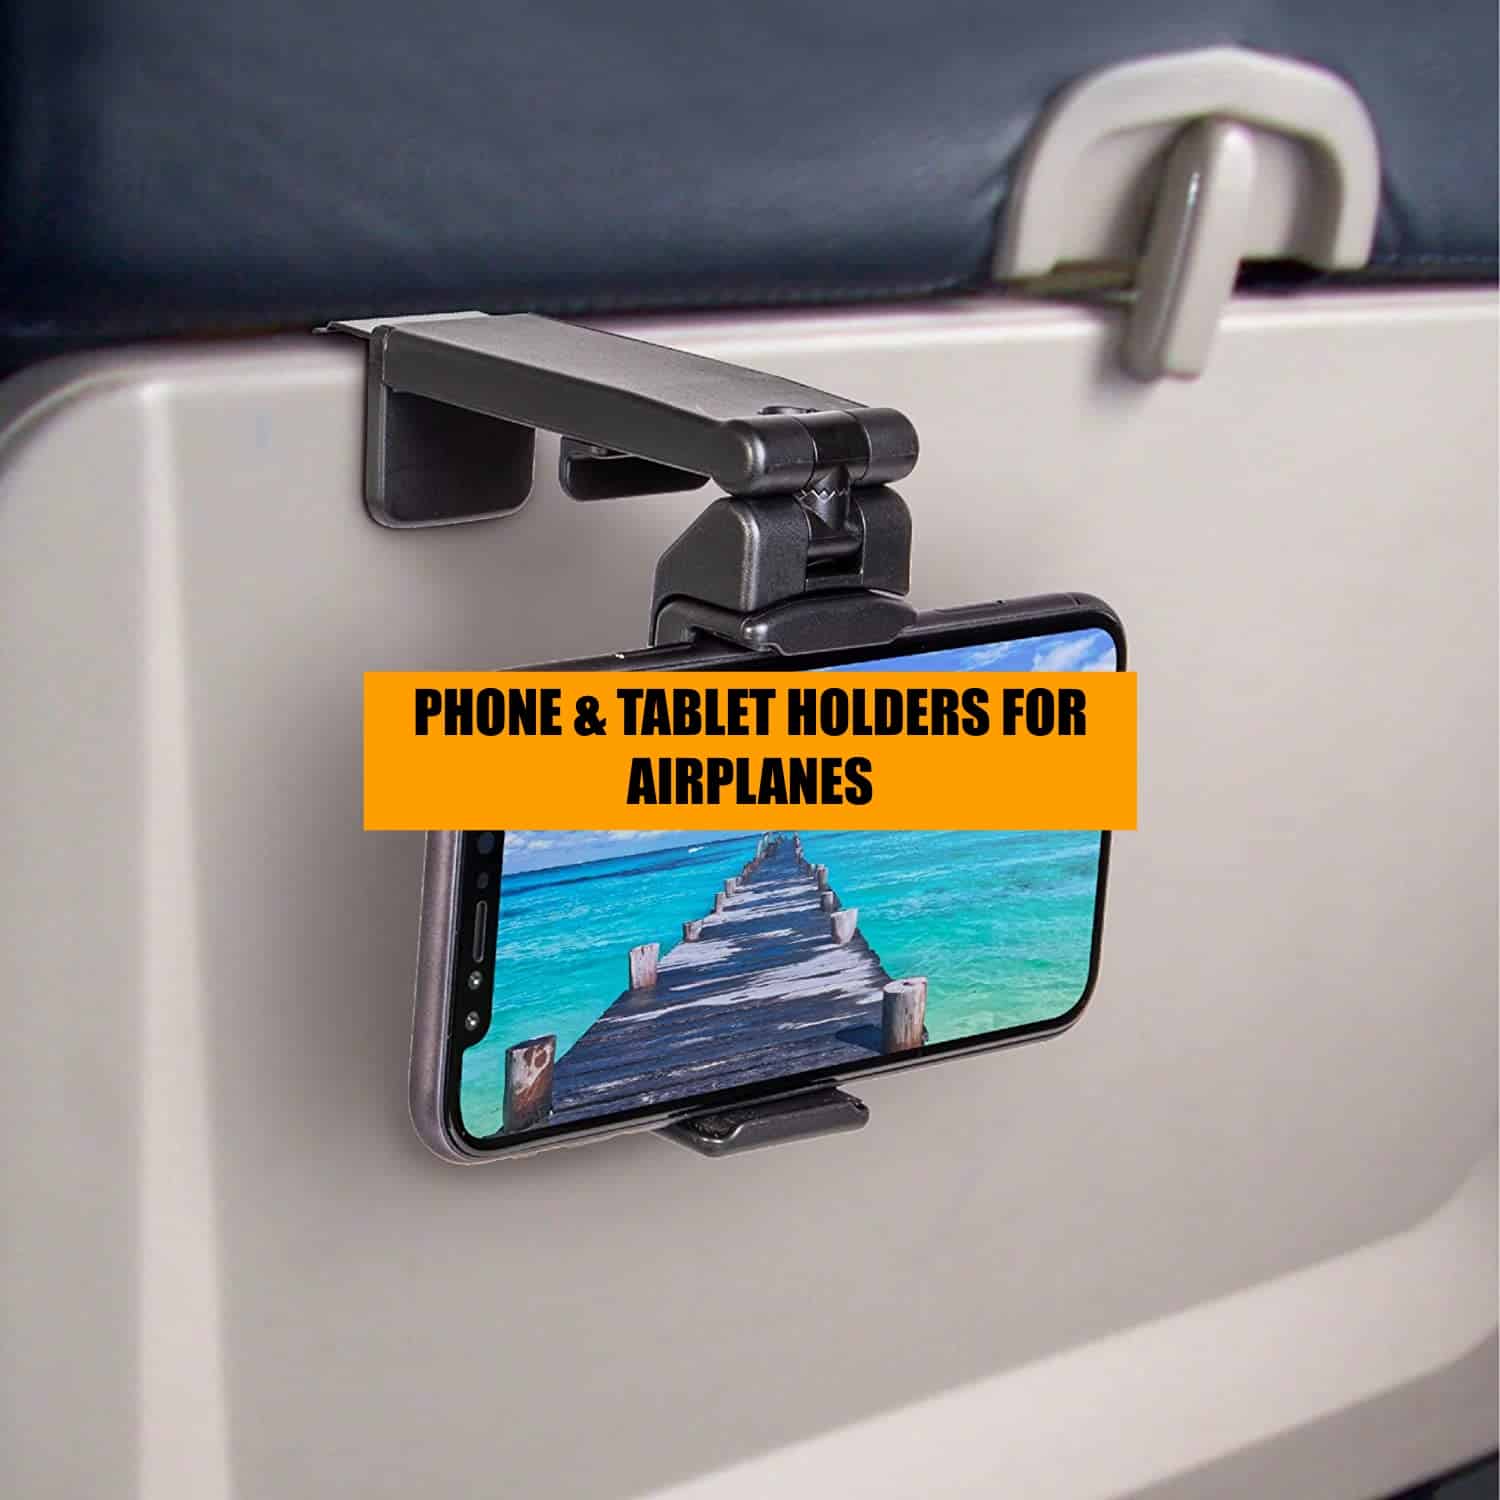 phone and tablet holders, stands for airplanes